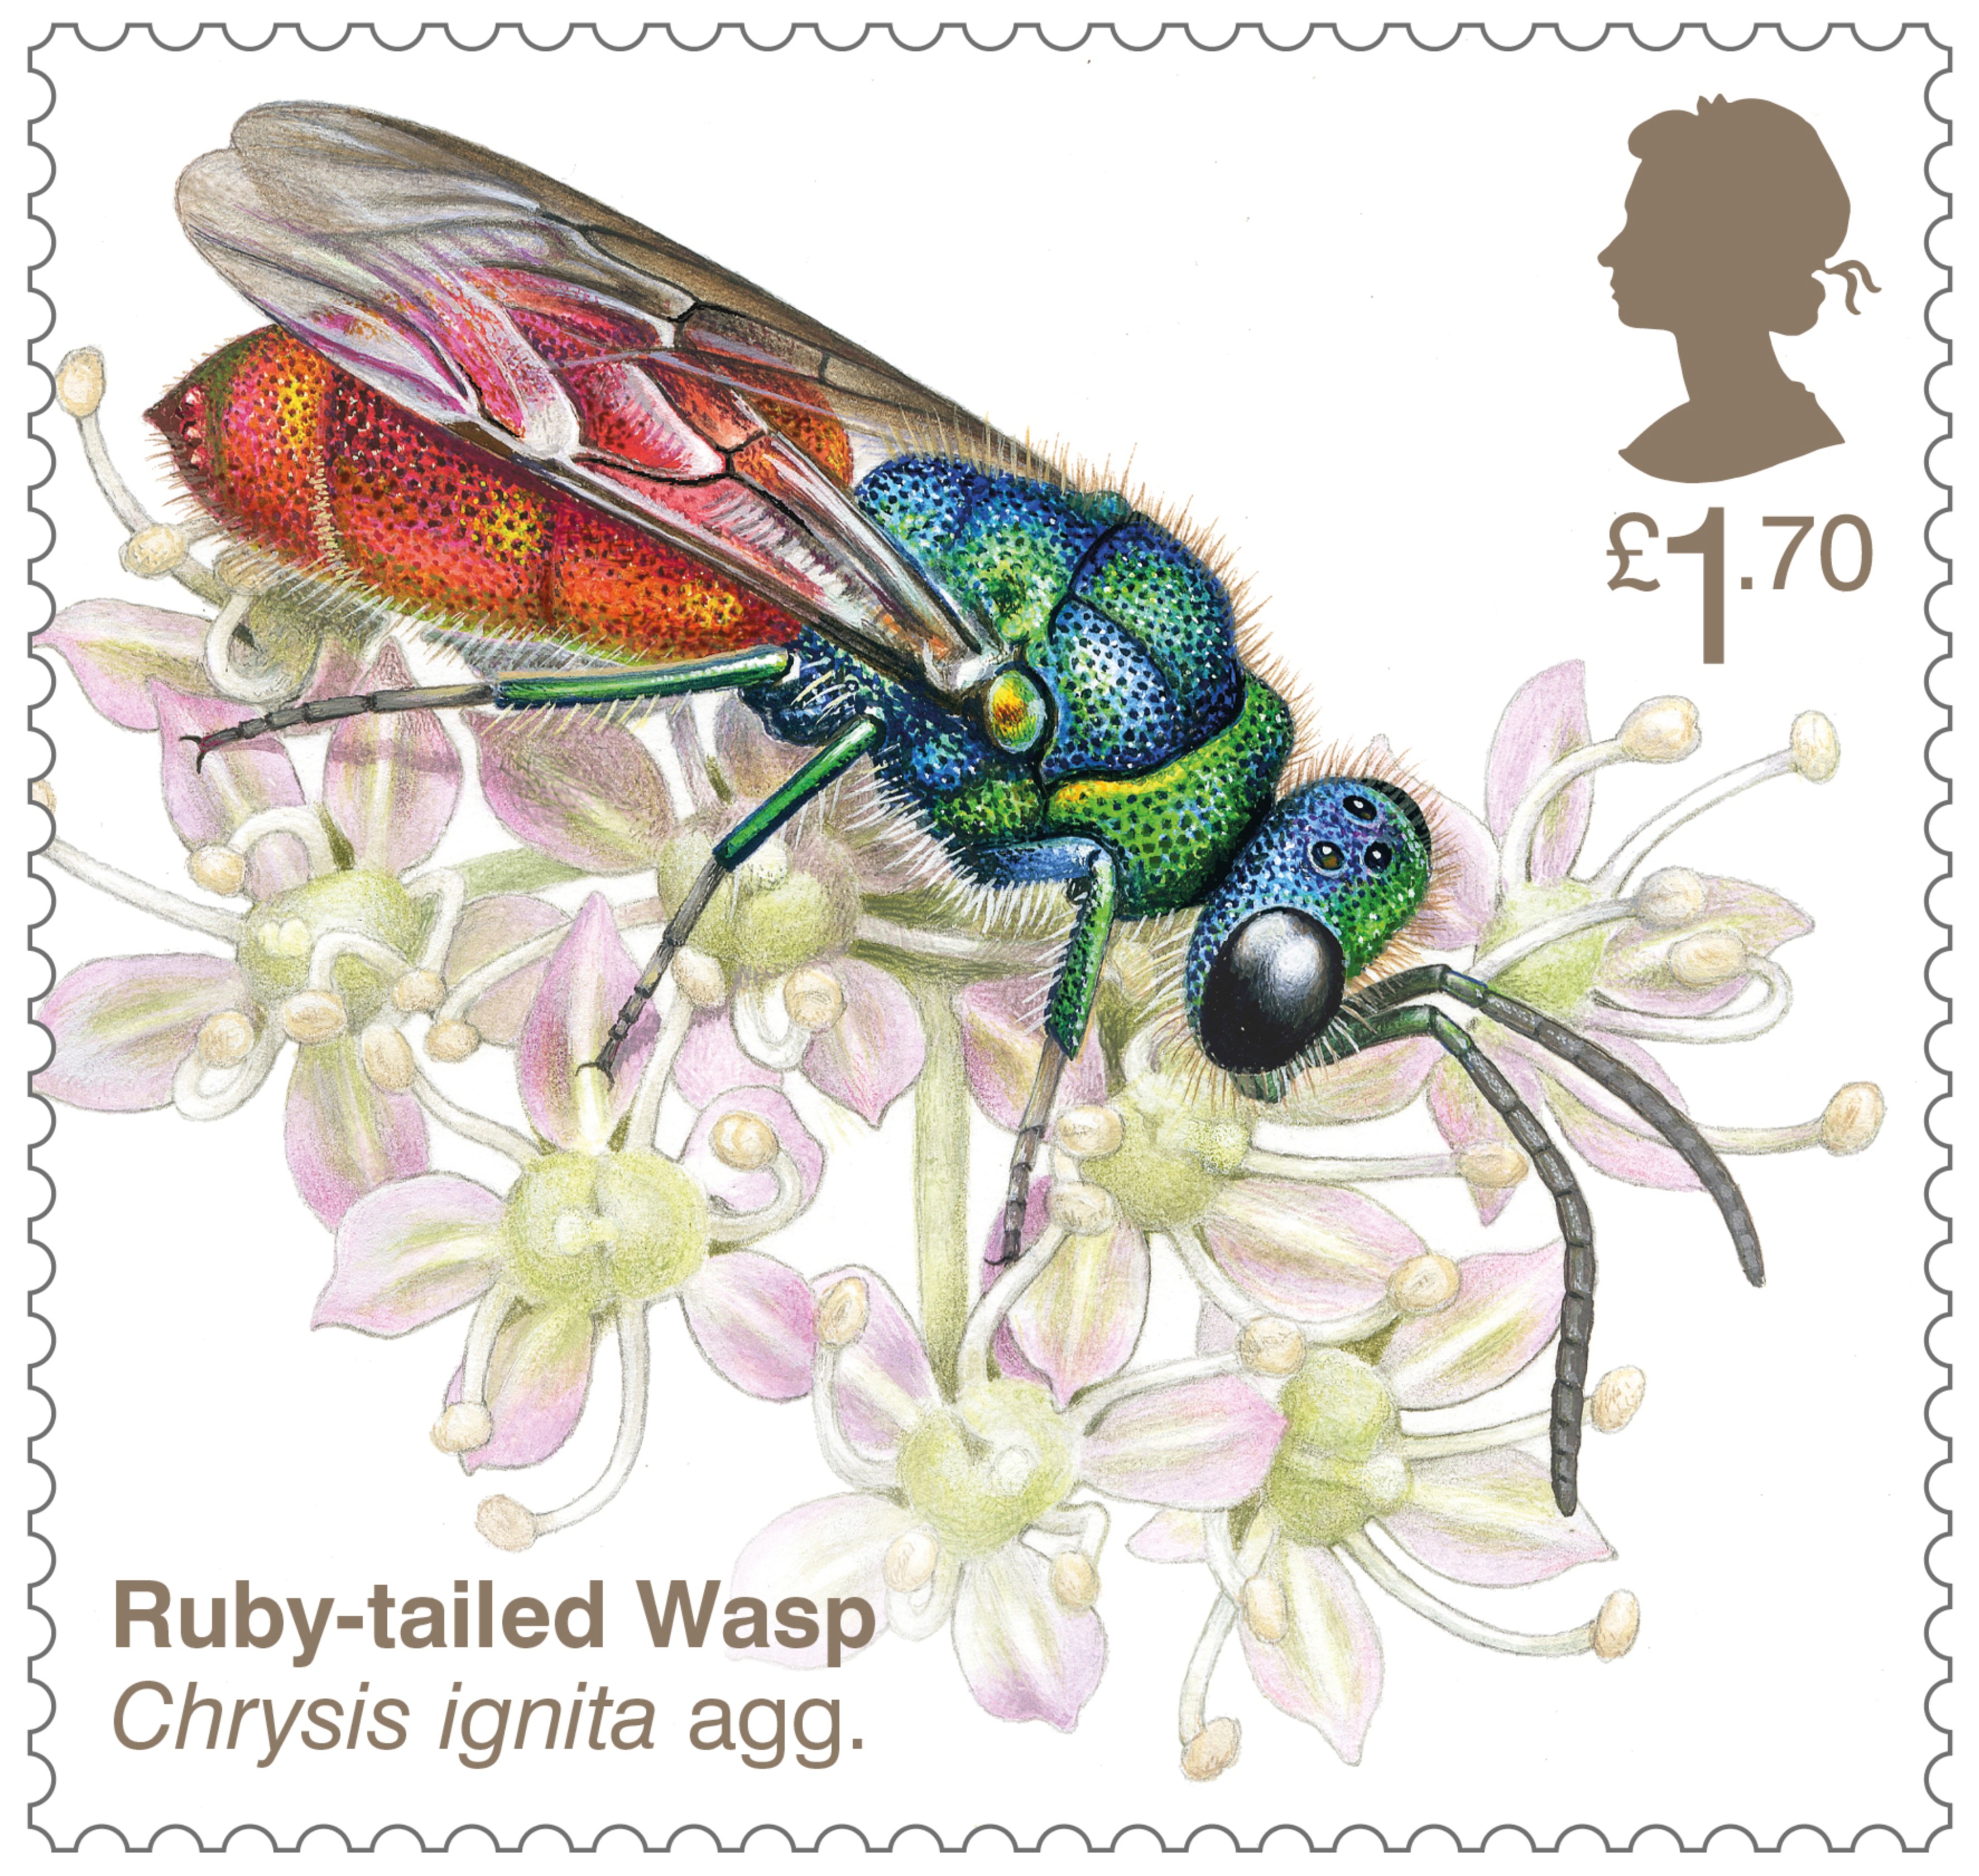 Ruby-tailed wasp stamp